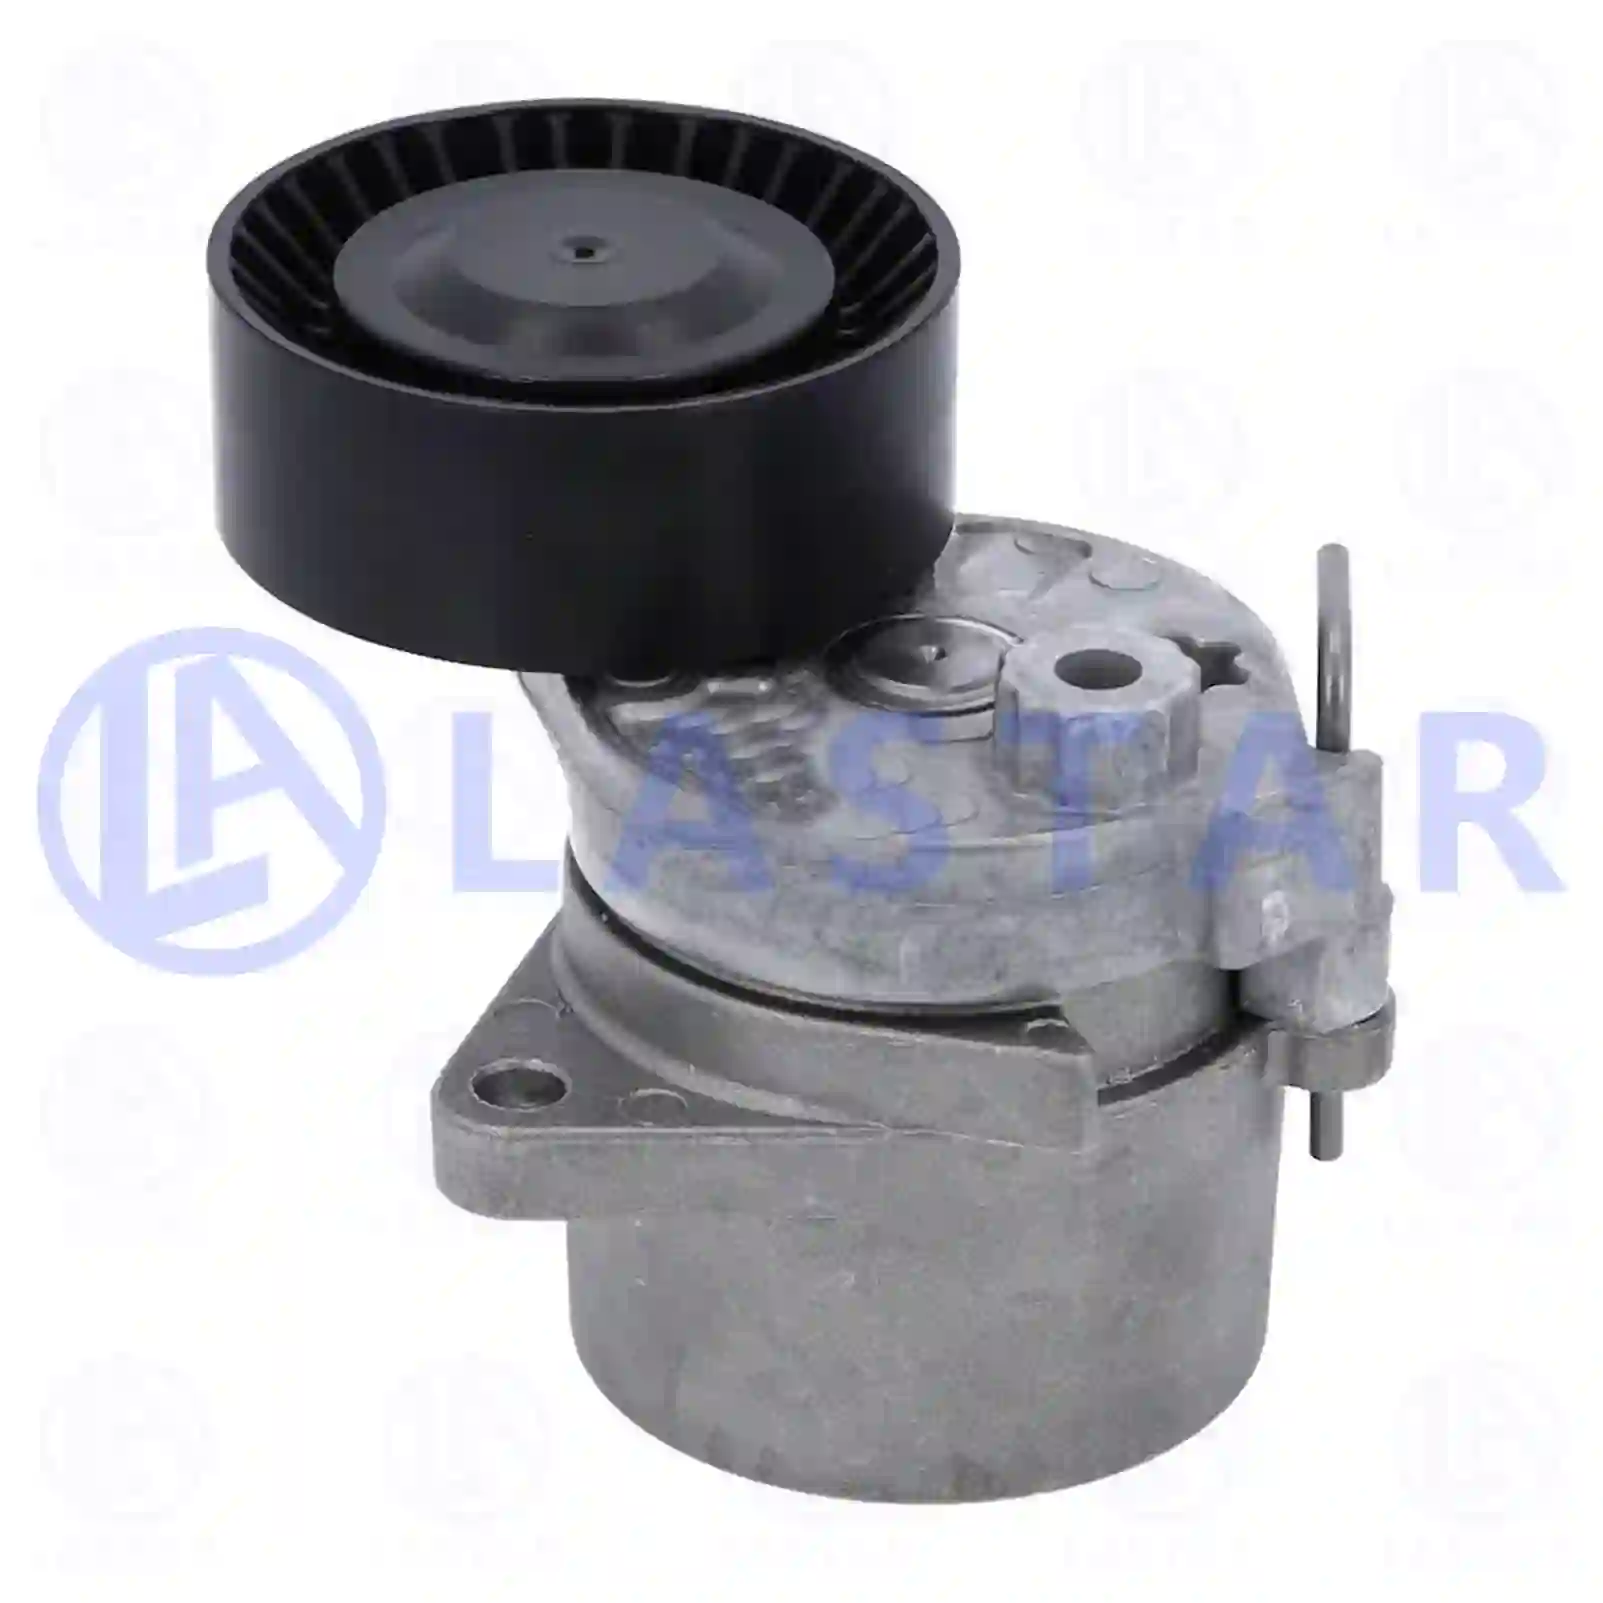 Belt tensioner, 77708015, 5080241AA, 5080243AA, 68001798AA, 68001798AB, K05080241AA, 5080241AA, 5080241AB, 5080243AA, 68001798AA, 68001798AB, K05080241AA, 6112000270, 6112000370, 6112000470, 6112000570, 6462000270, 6462000370, 6462000570 ||  77708015 Lastar Spare Part | Truck Spare Parts, Auotomotive Spare Parts Belt tensioner, 77708015, 5080241AA, 5080243AA, 68001798AA, 68001798AB, K05080241AA, 5080241AA, 5080241AB, 5080243AA, 68001798AA, 68001798AB, K05080241AA, 6112000270, 6112000370, 6112000470, 6112000570, 6462000270, 6462000370, 6462000570 ||  77708015 Lastar Spare Part | Truck Spare Parts, Auotomotive Spare Parts